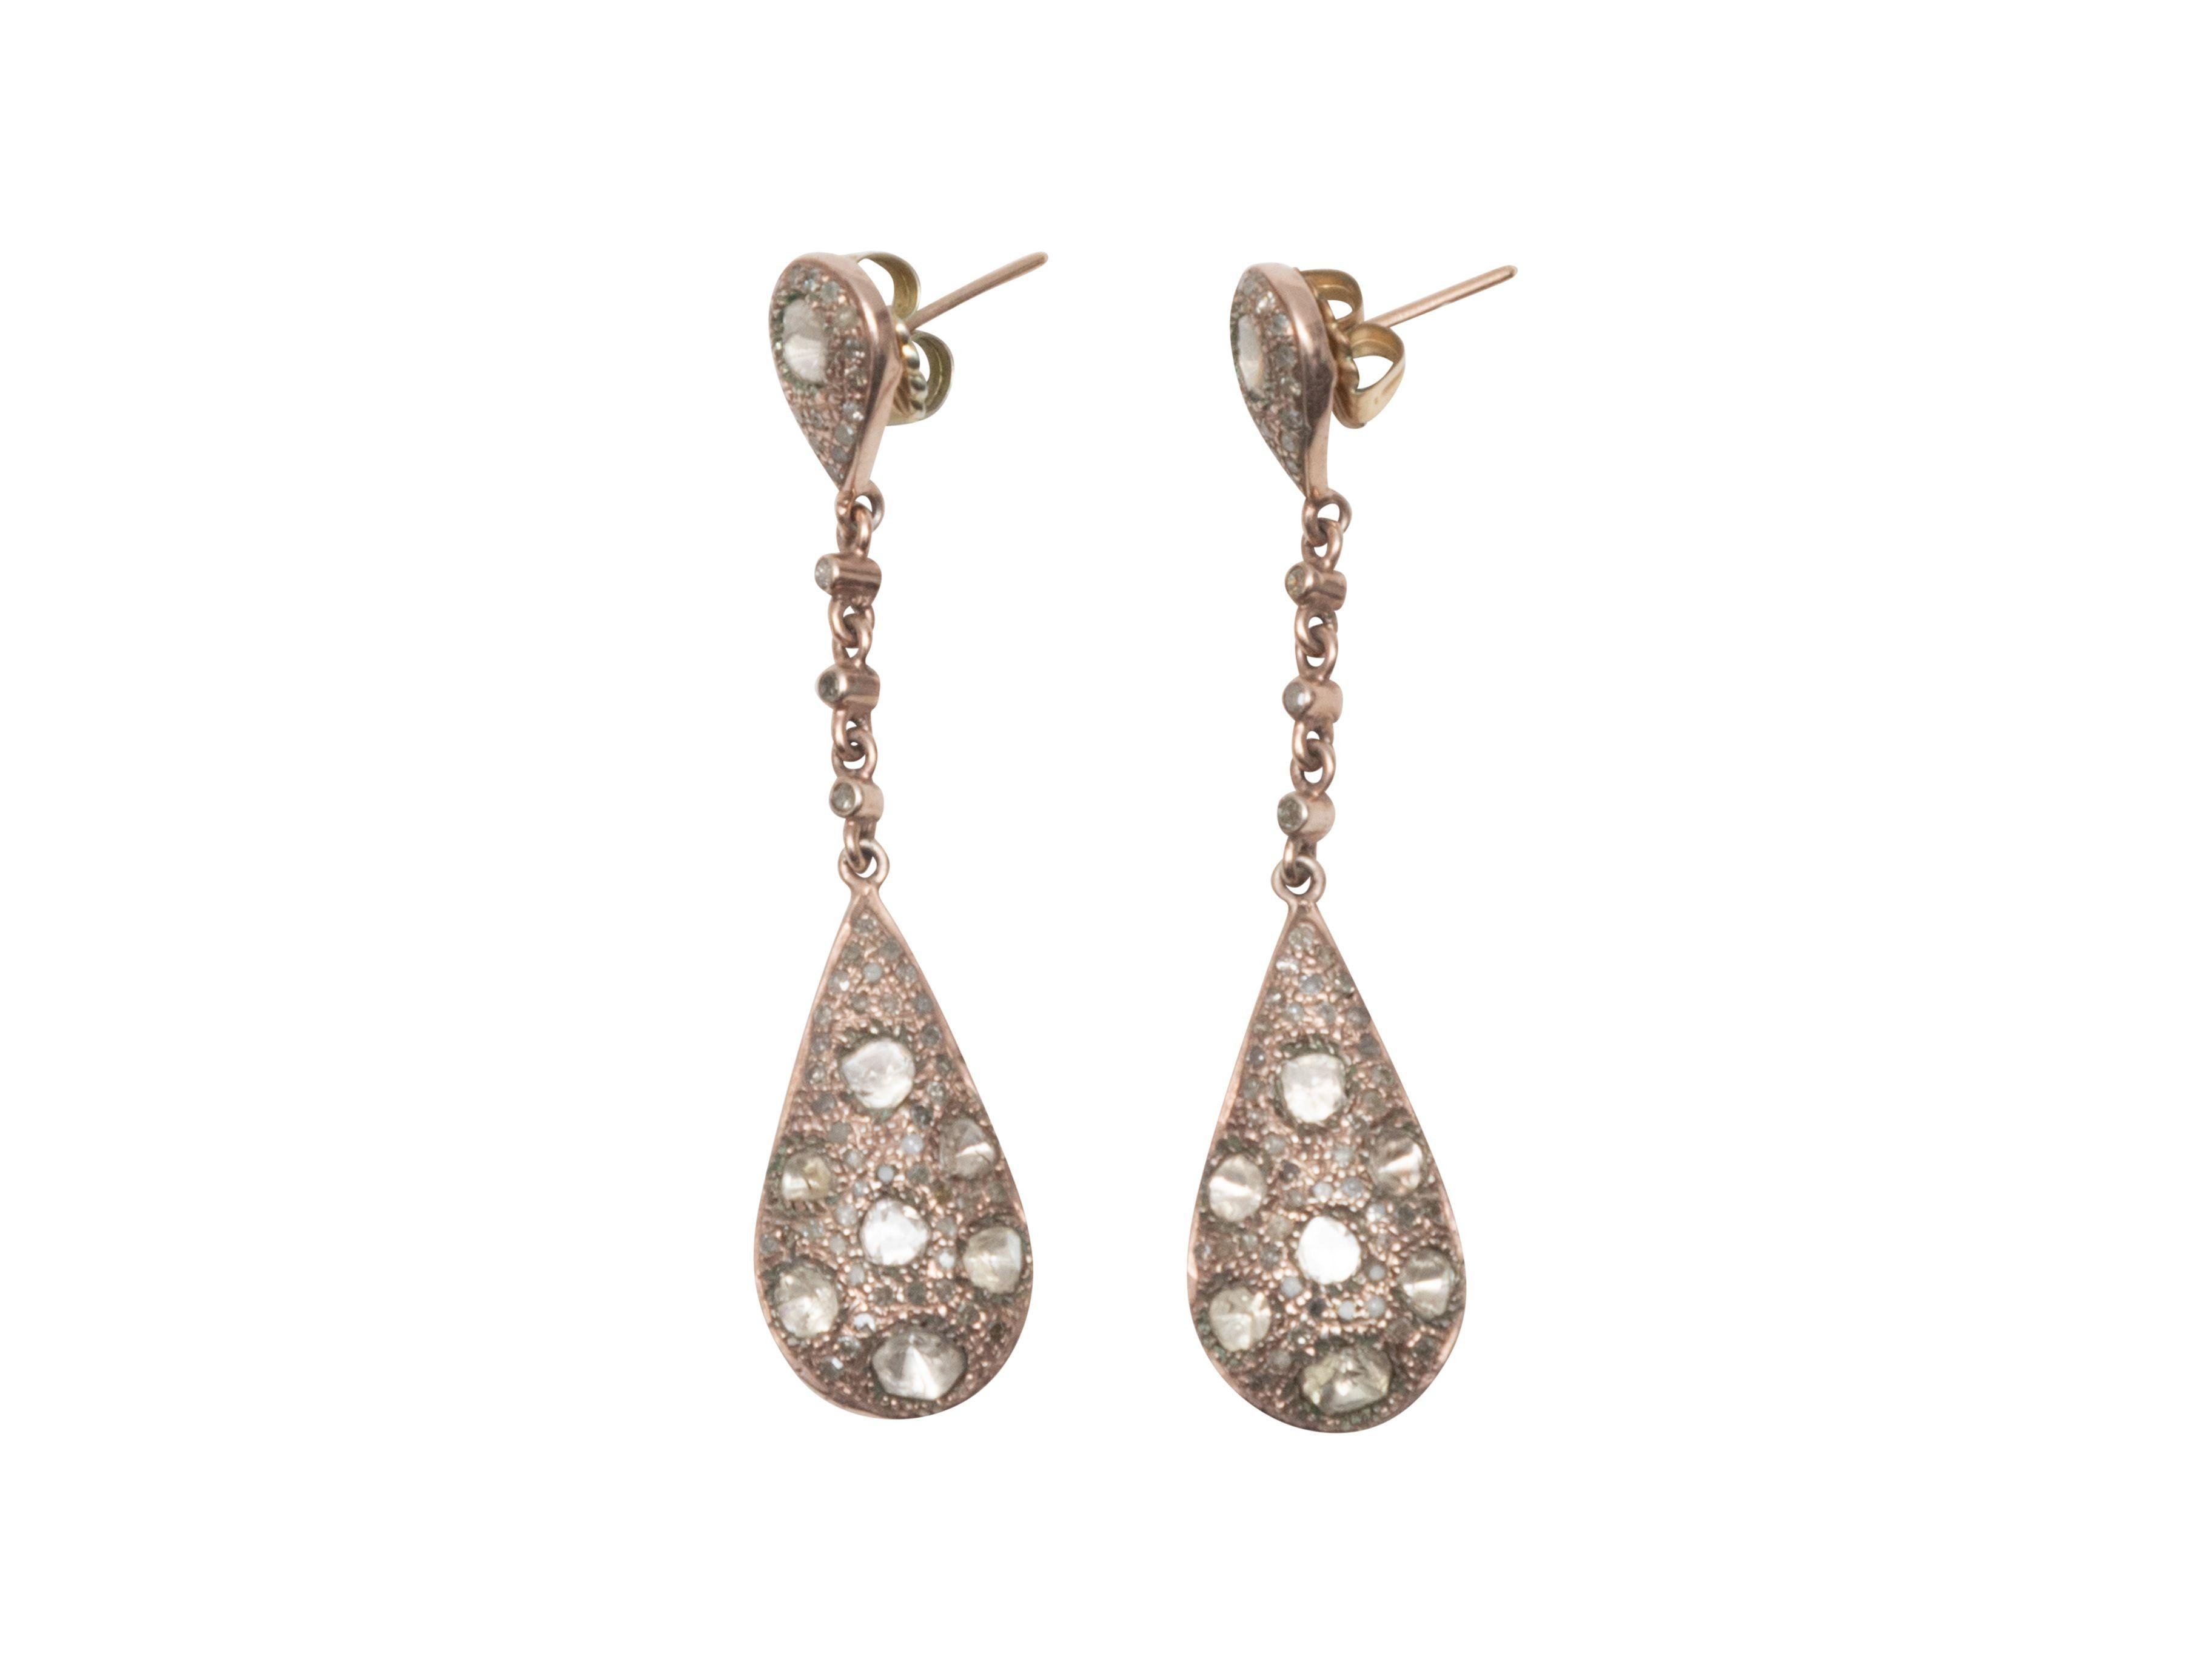 Product Details: Silver and moonstone drop pierced earrings by Jennifer Miller. Butterfly back closures. 2.5